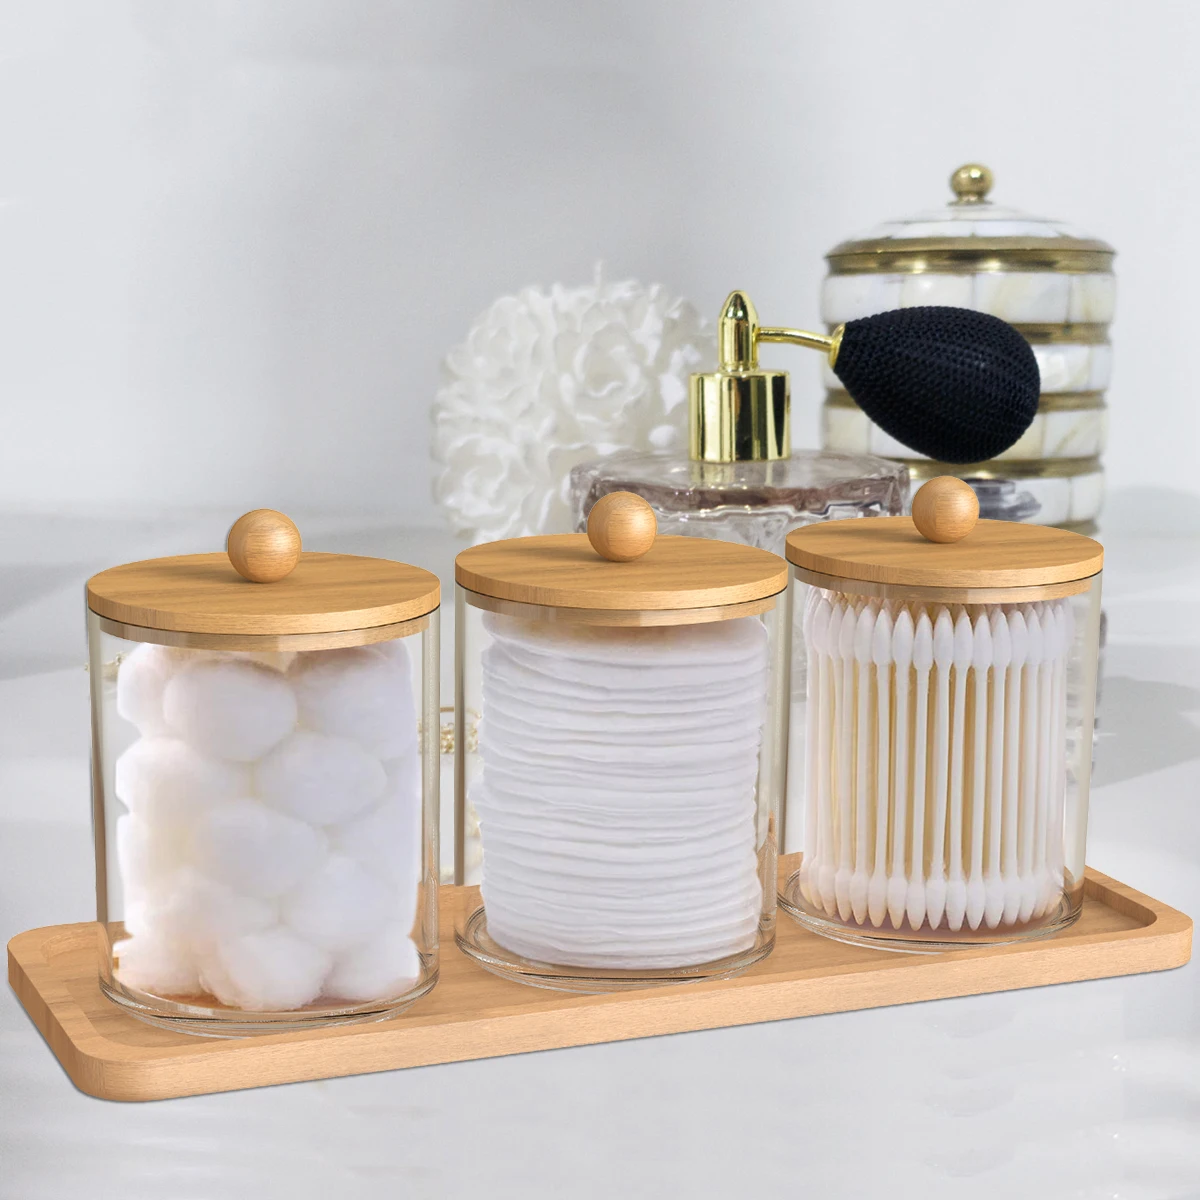 

Dispenser Lids Bamboo Qtip 3pcs Clear Holder Reusable Tray Cotton With With Dispenser Swab Acrylic Jars Storage Bathroom